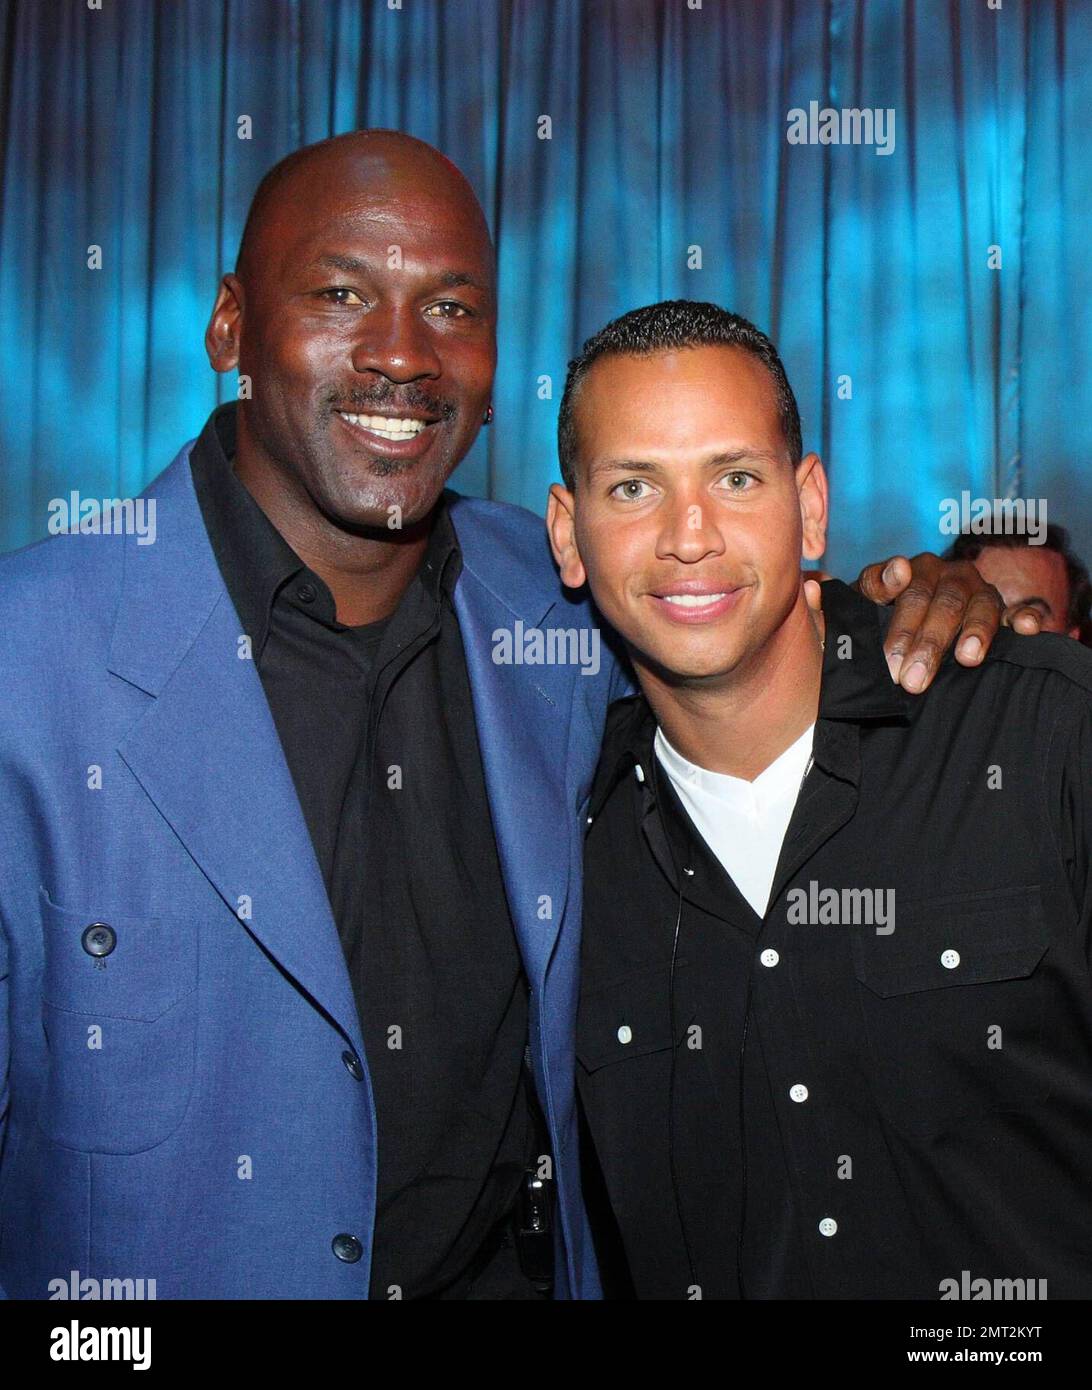 Michael jordan charity hi-res stock photography and images - Alamy